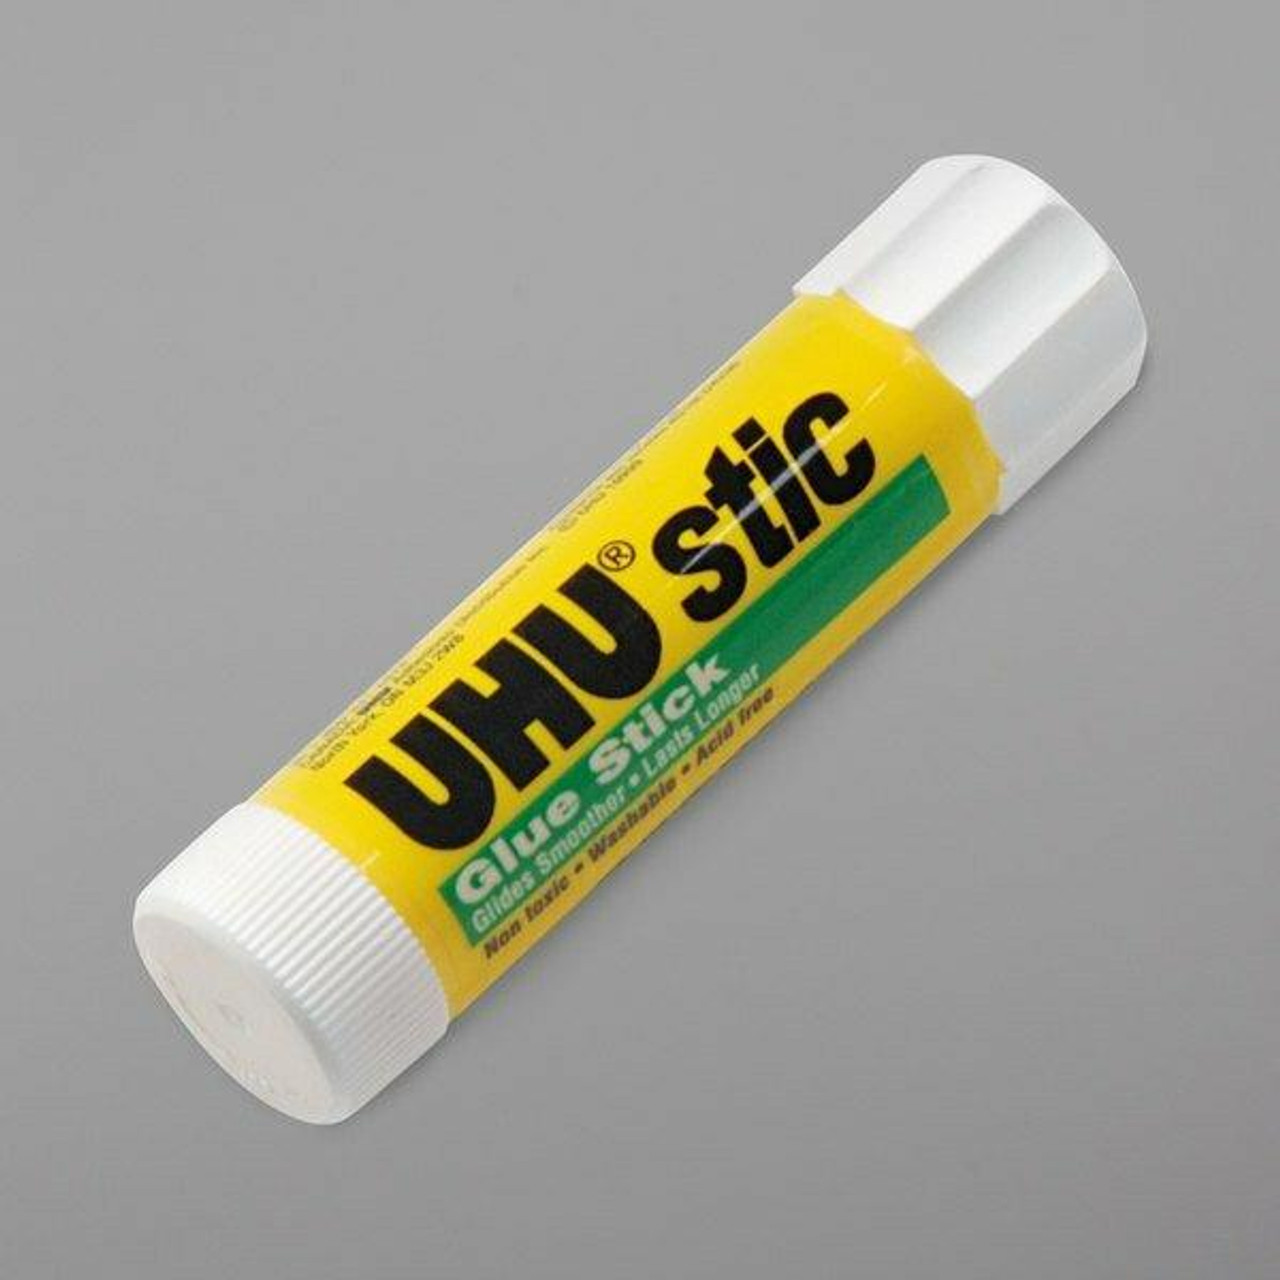 UHU Stic Glue Stick Solid Washable Non-Toxic 21g Ref 45611 [Pack of 12]